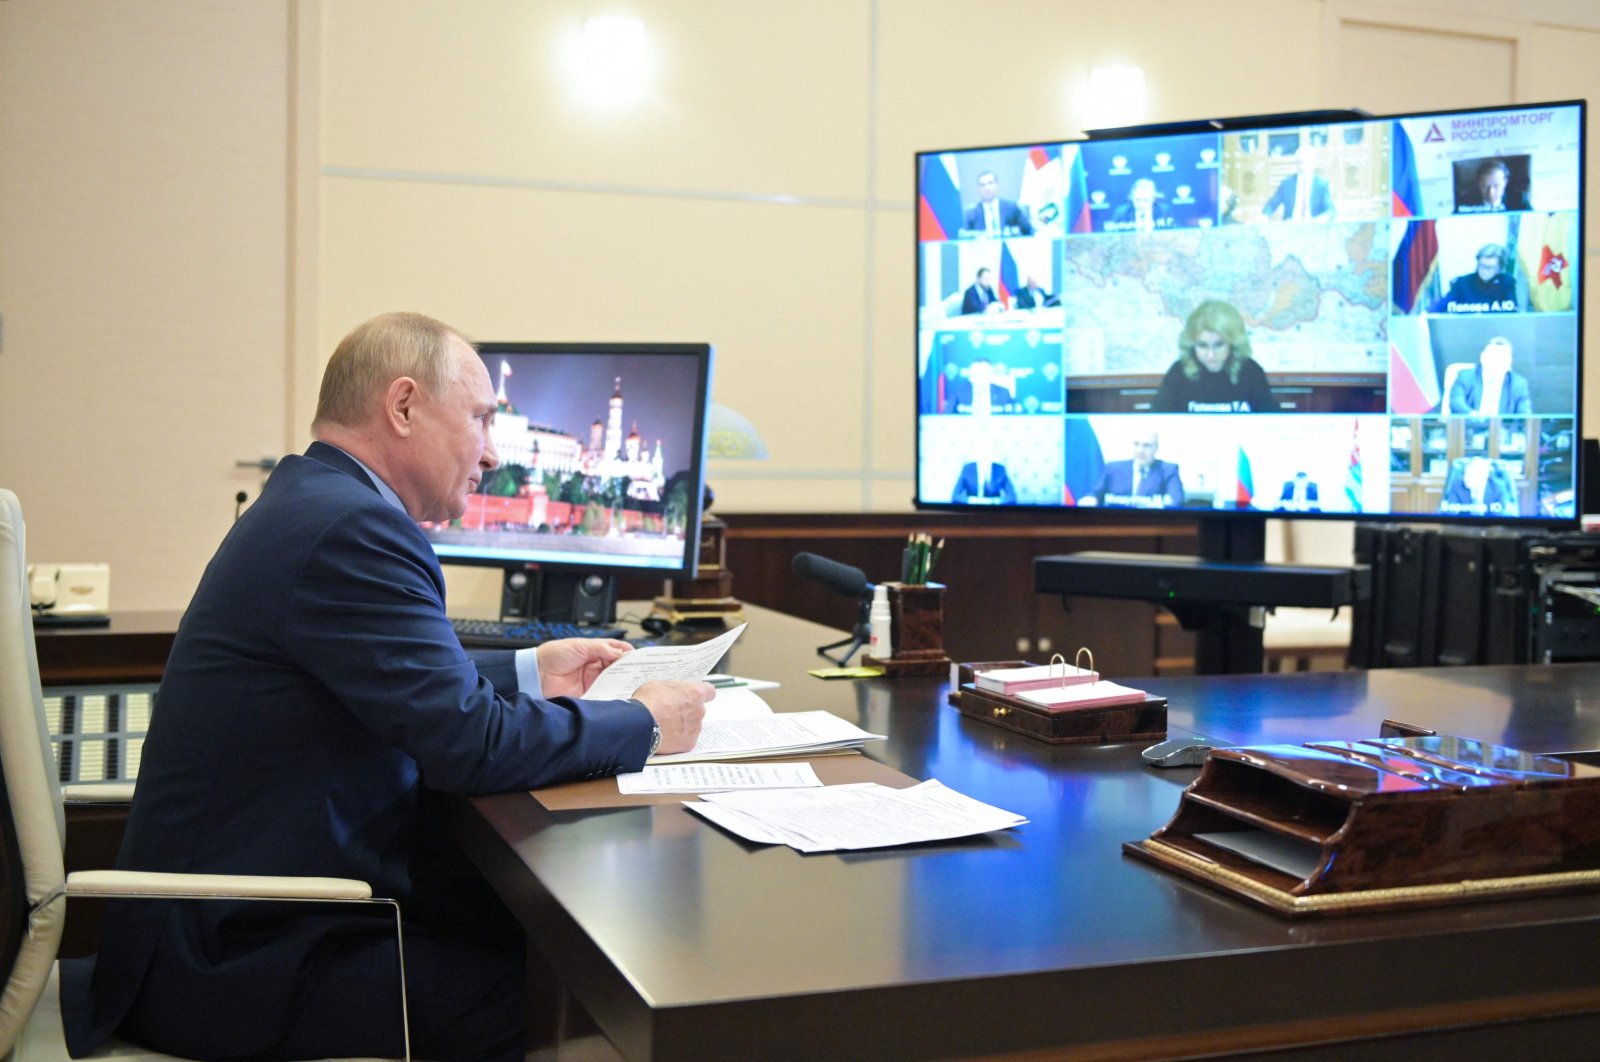 Russian President Vladimir Putin chairs a meeting with members of the government via a teleconference call at the Novo-Ogaryovo state residence outside Moscow on Oct. 20, 2021. (Photo by Alexey Druzhinin / Sputnik / AFP)